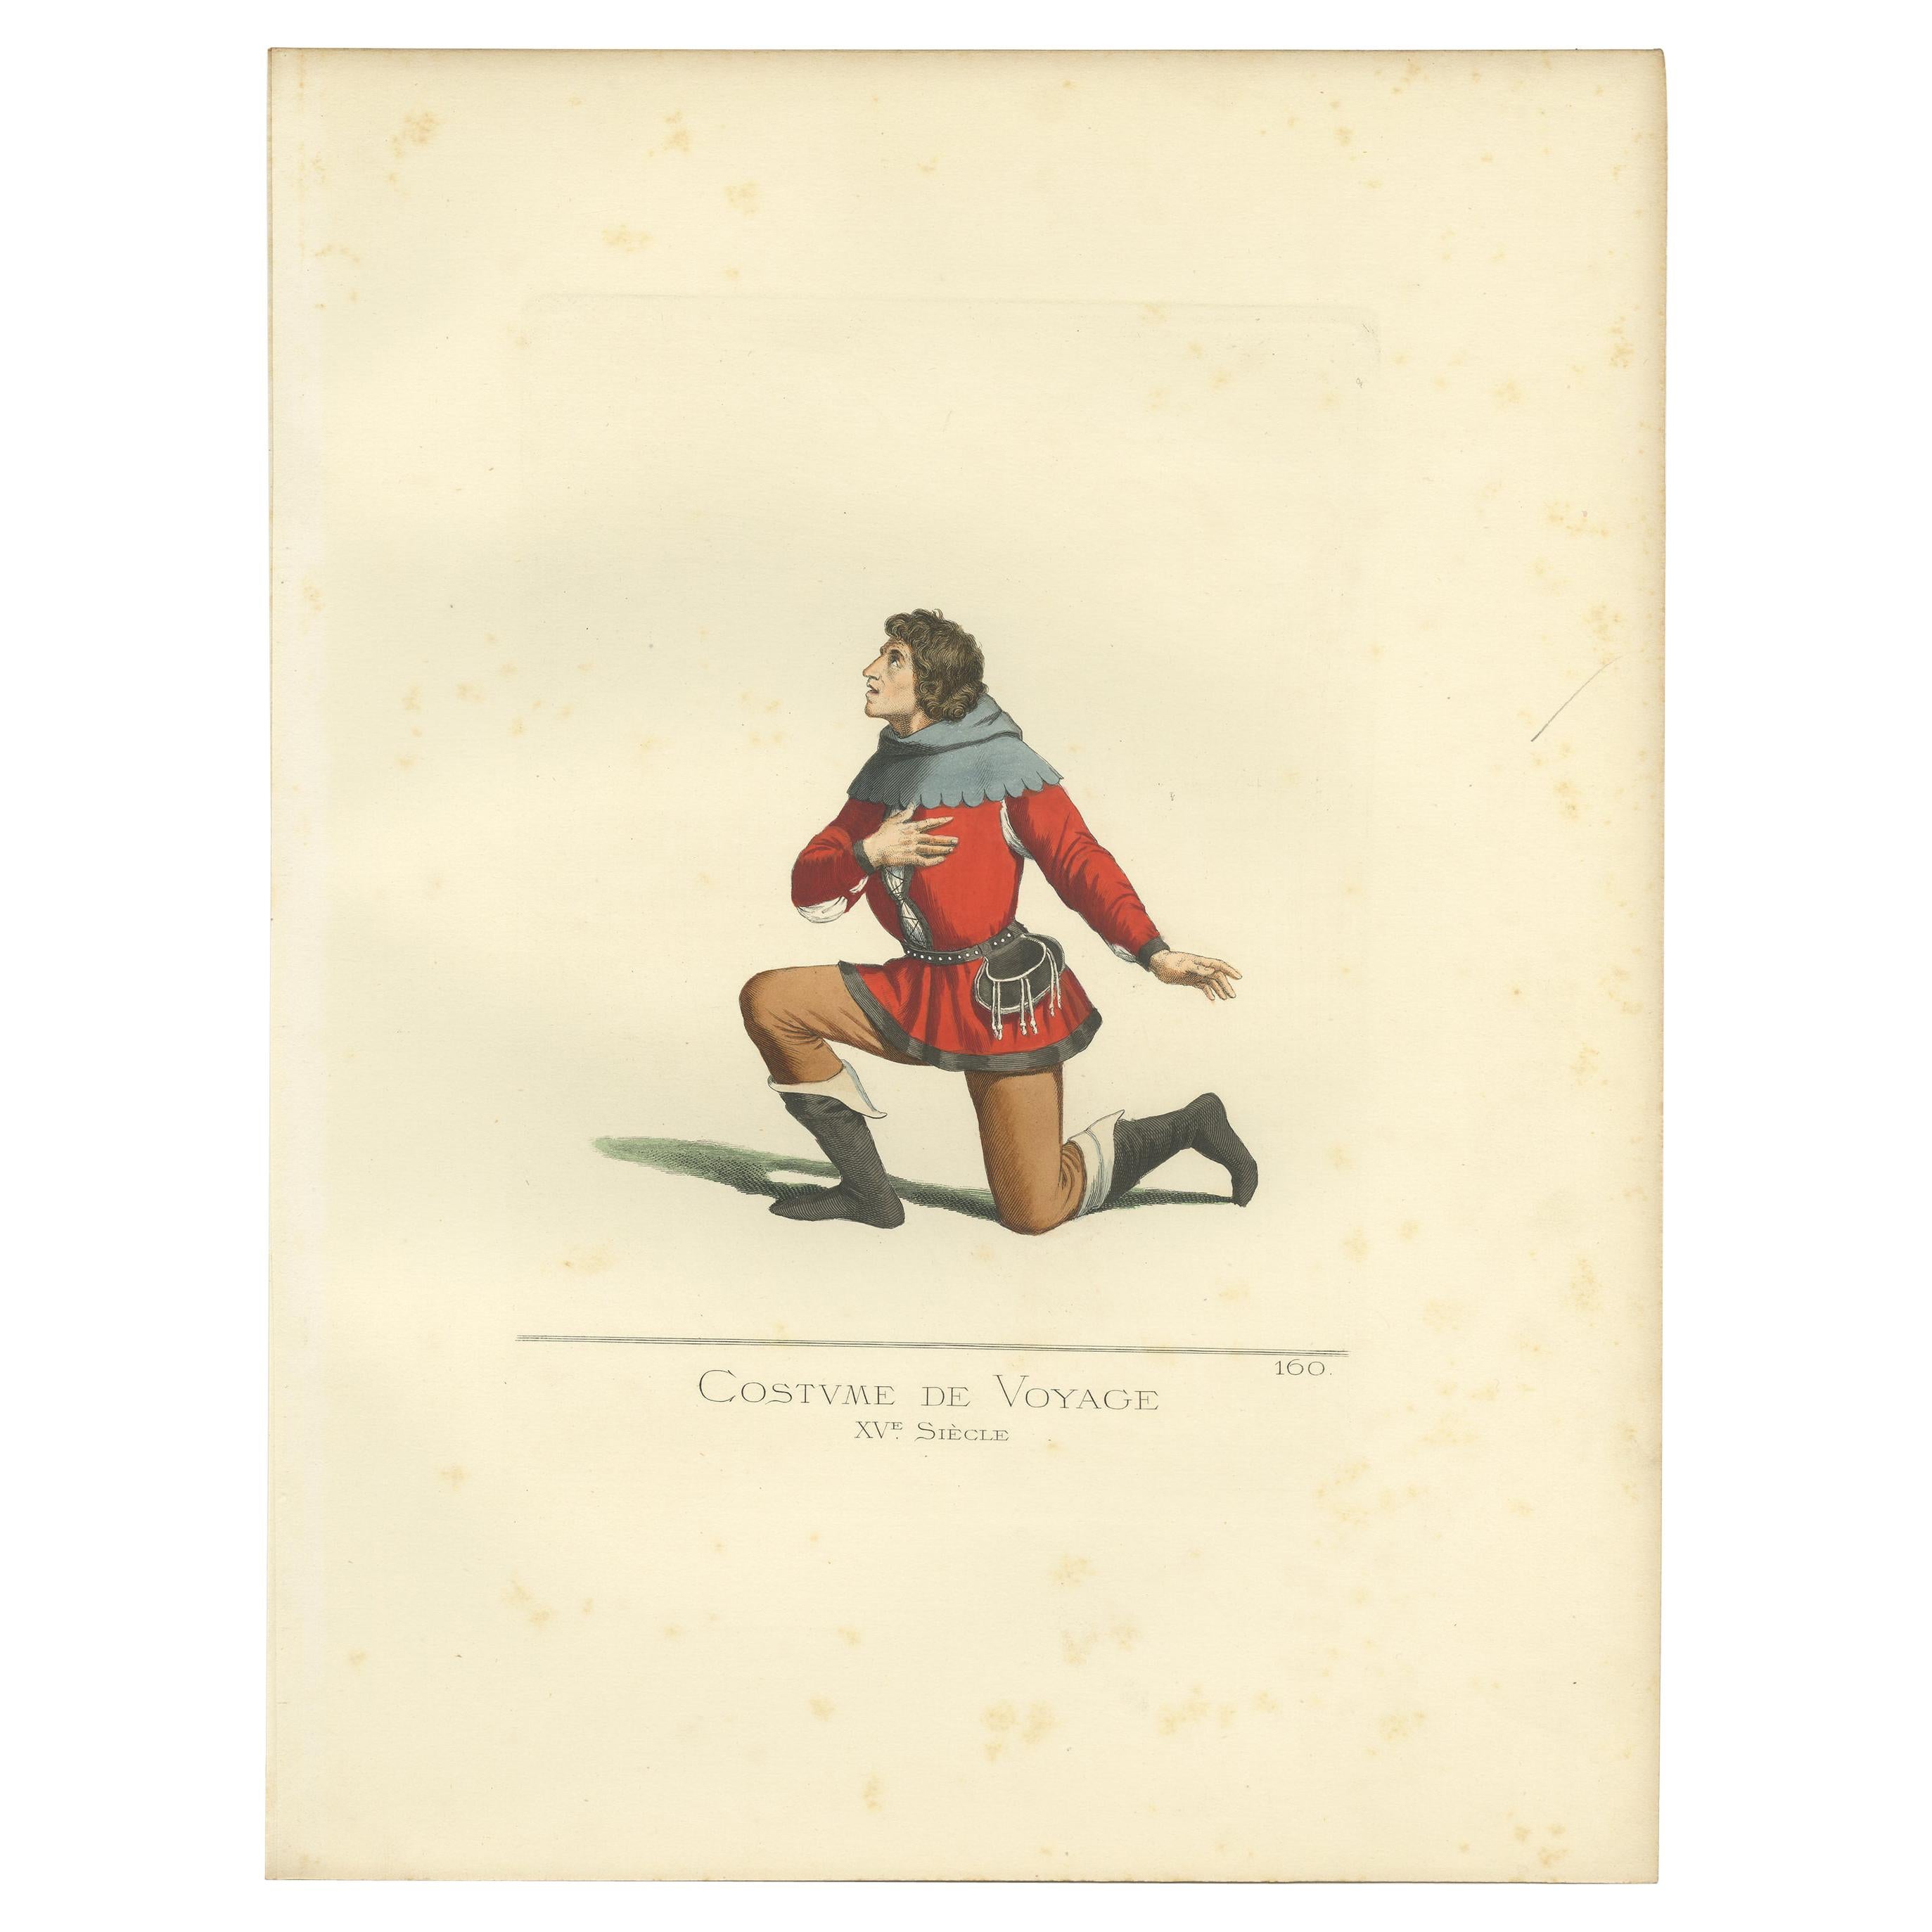 Antique Print of a Travel Costume, 15th Century, by Bonnard, 1860